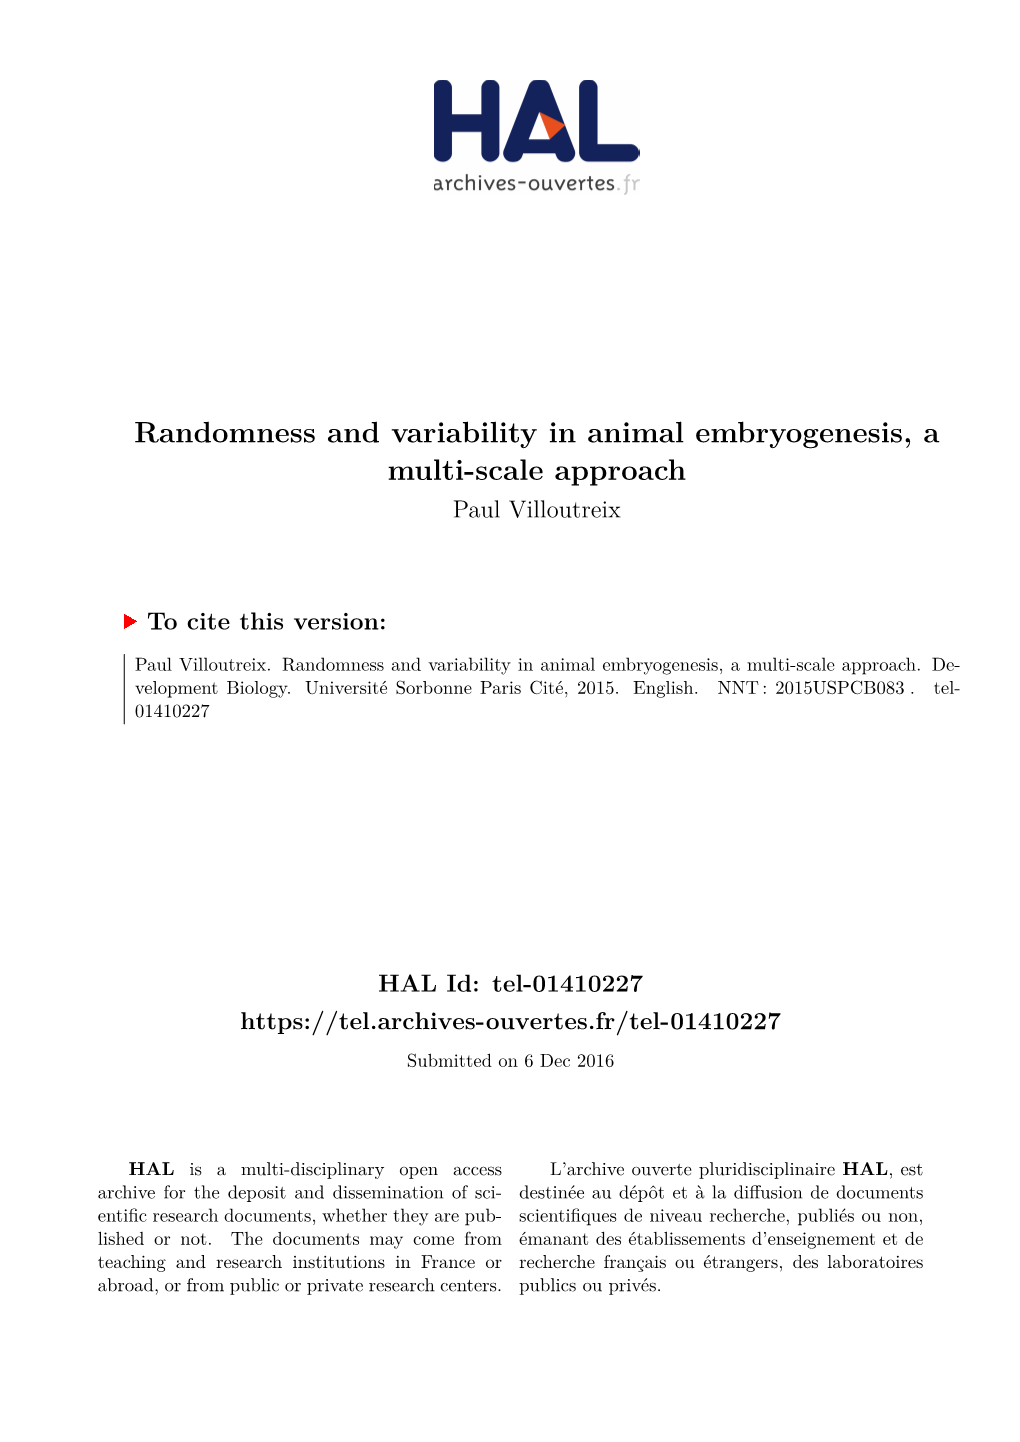 Randomness and Variability in Animal Embryogenesis, a Multi-Scale Approach Paul Villoutreix